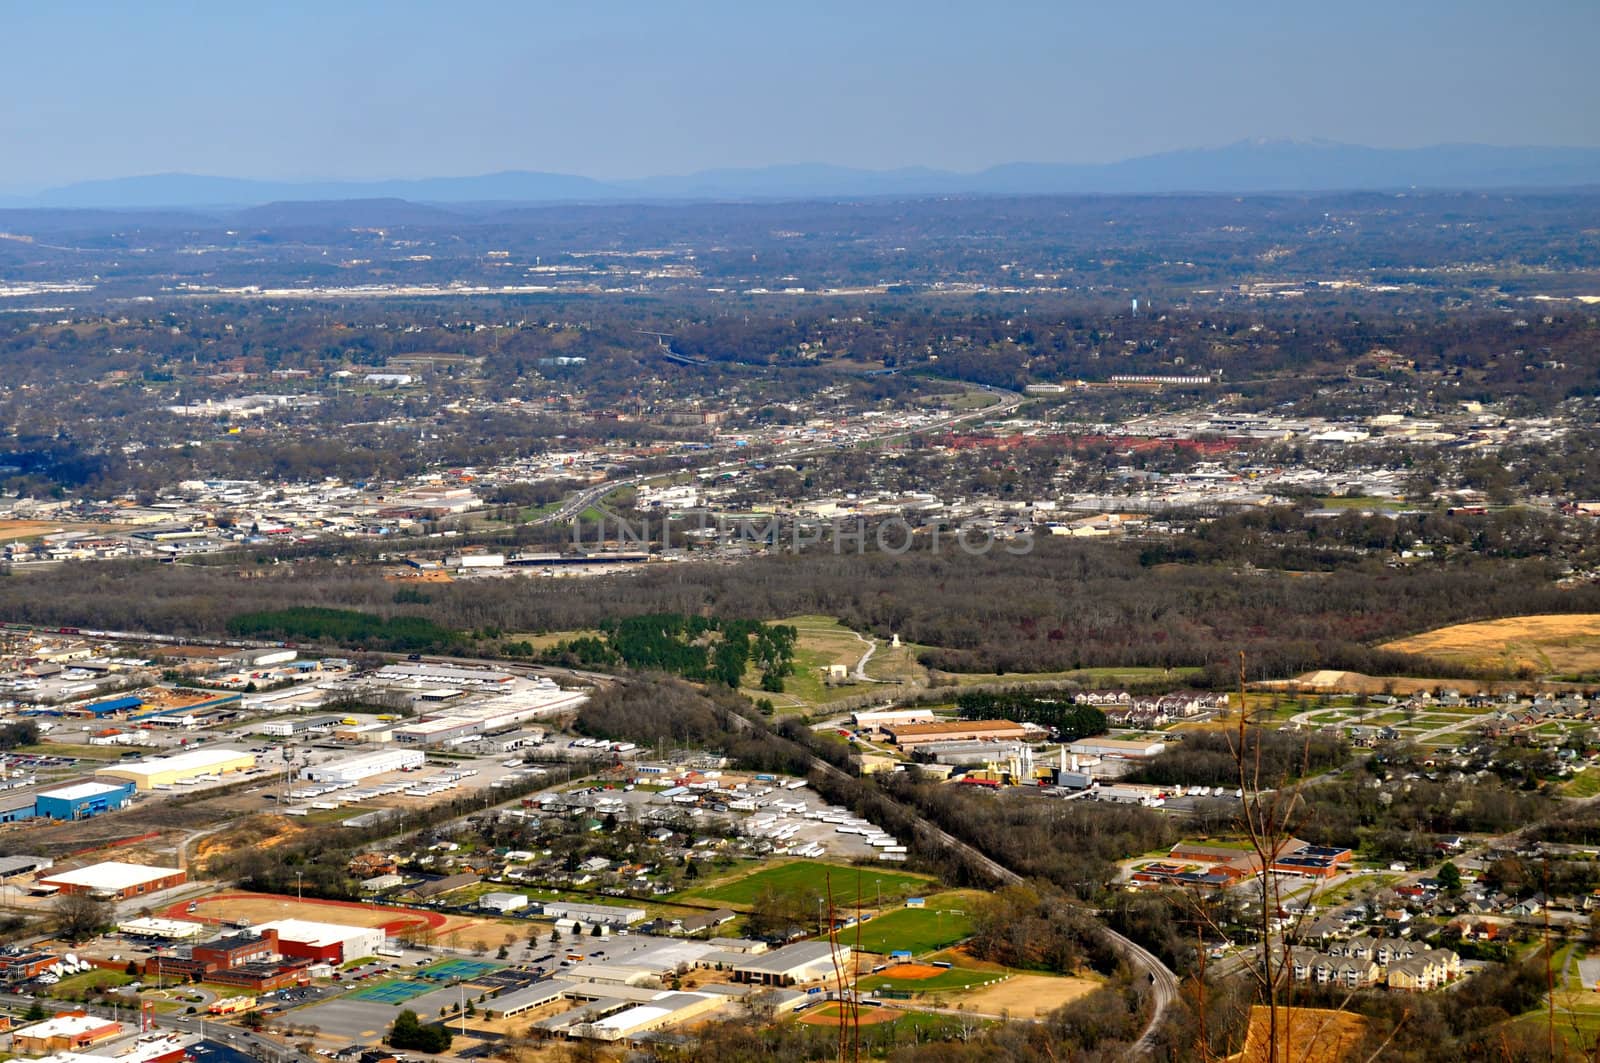 Chattanooga City View
